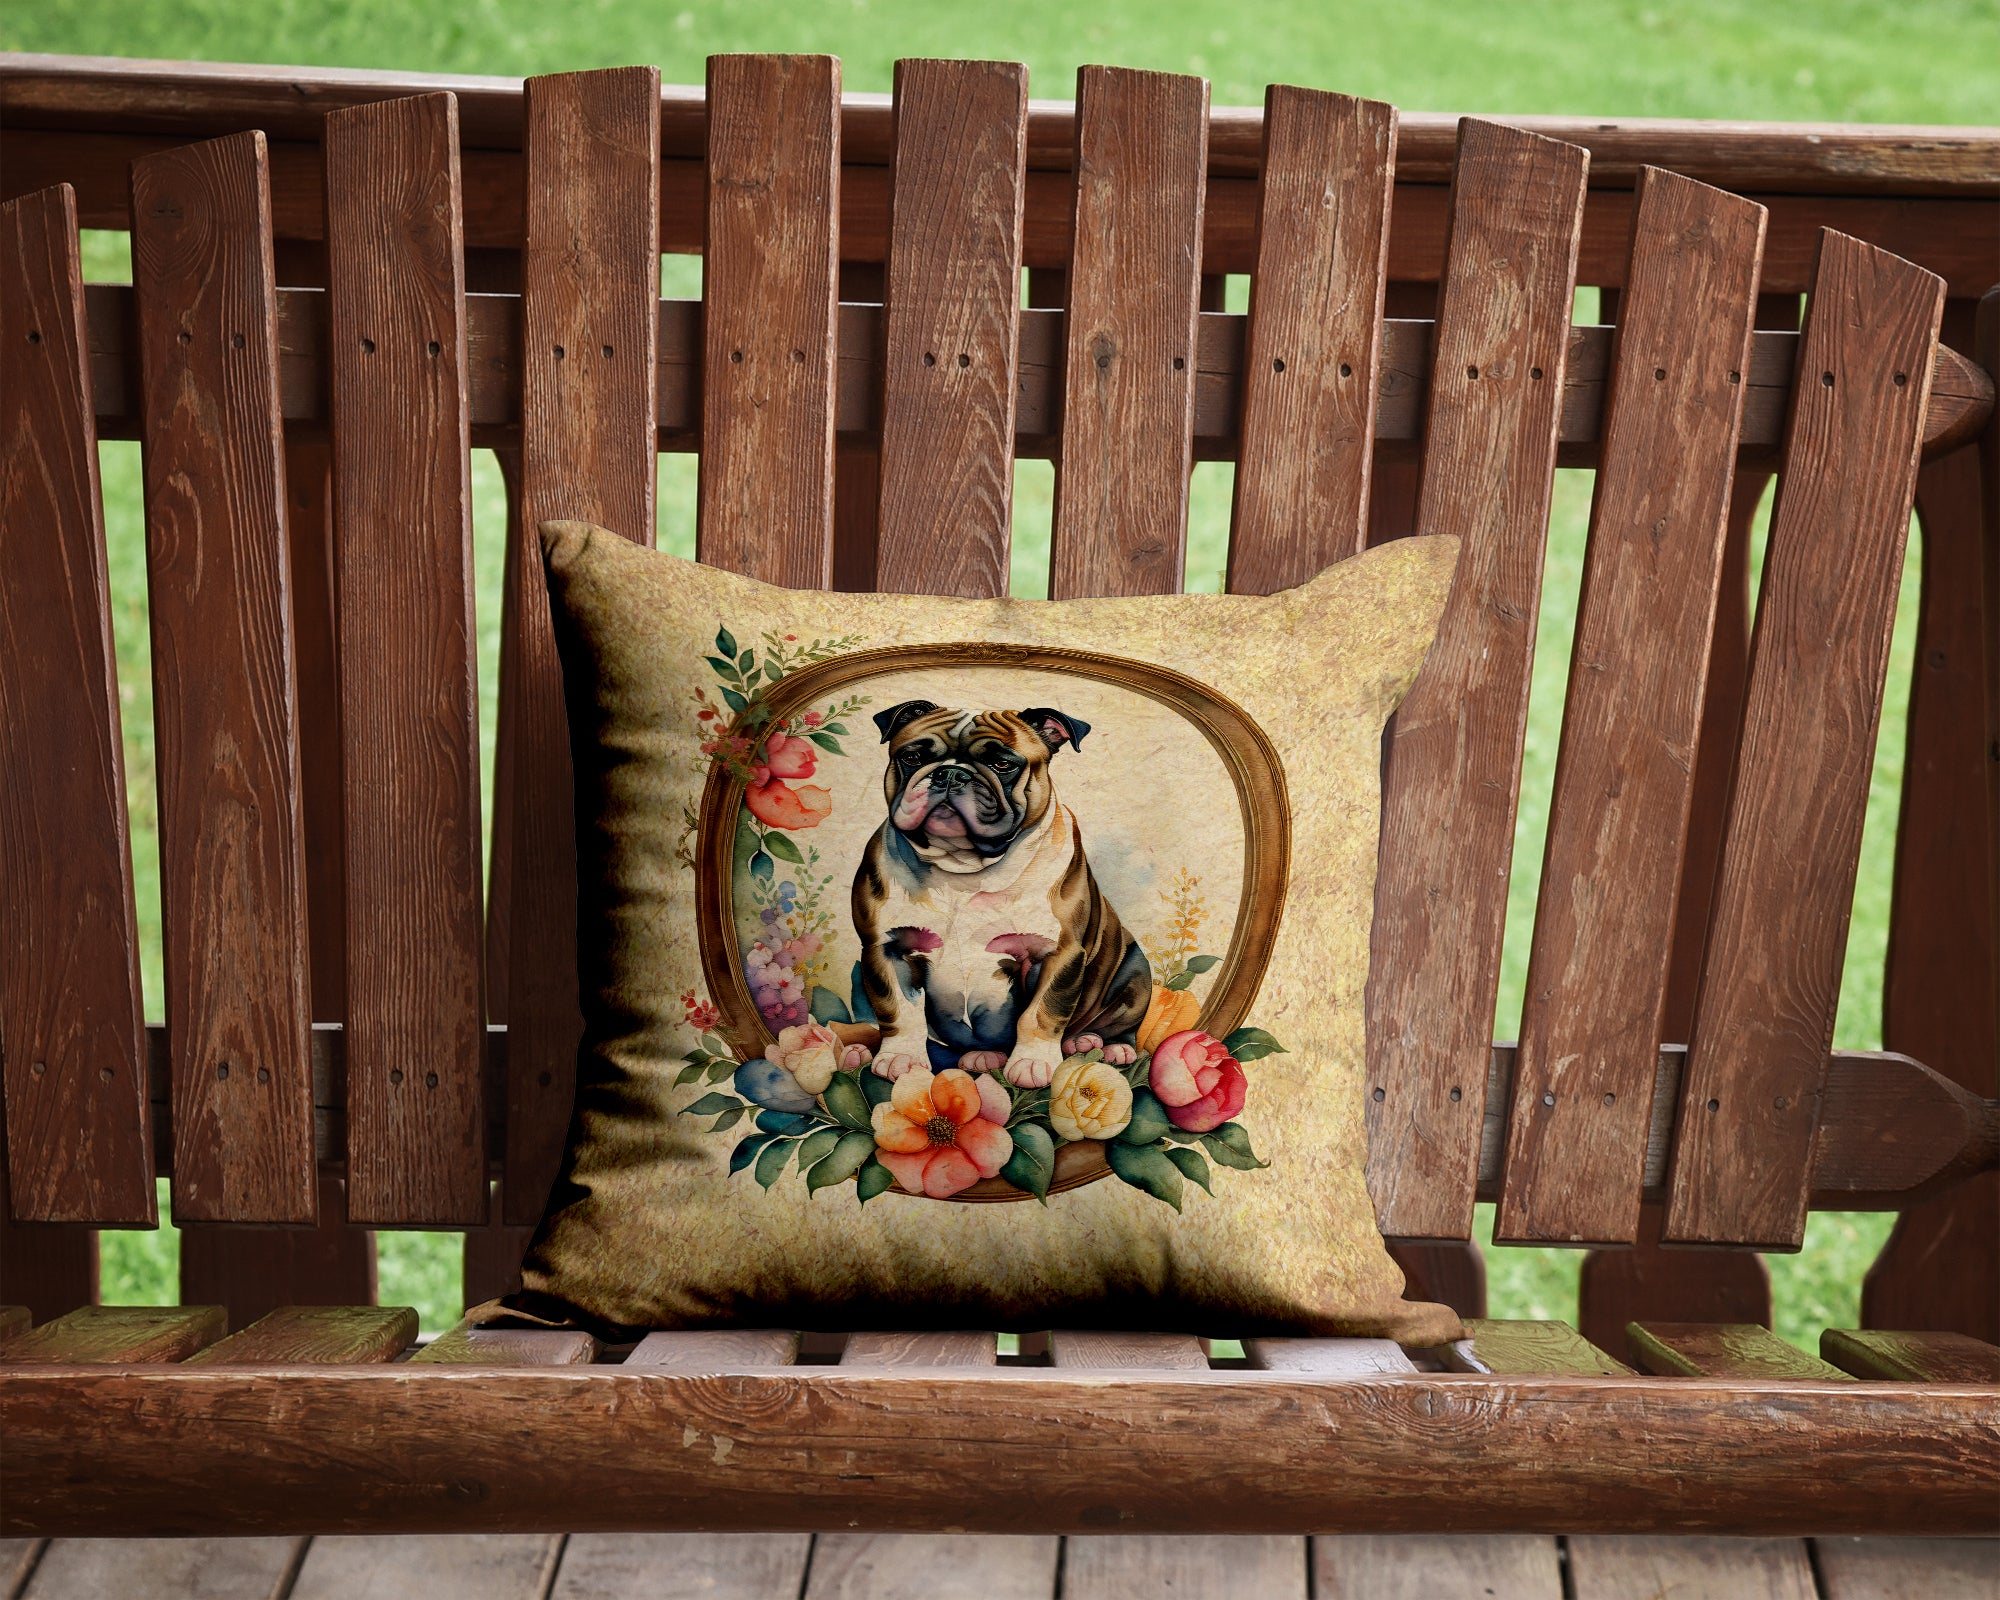 Buy this English Bulldog and Flowers Fabric Decorative Pillow